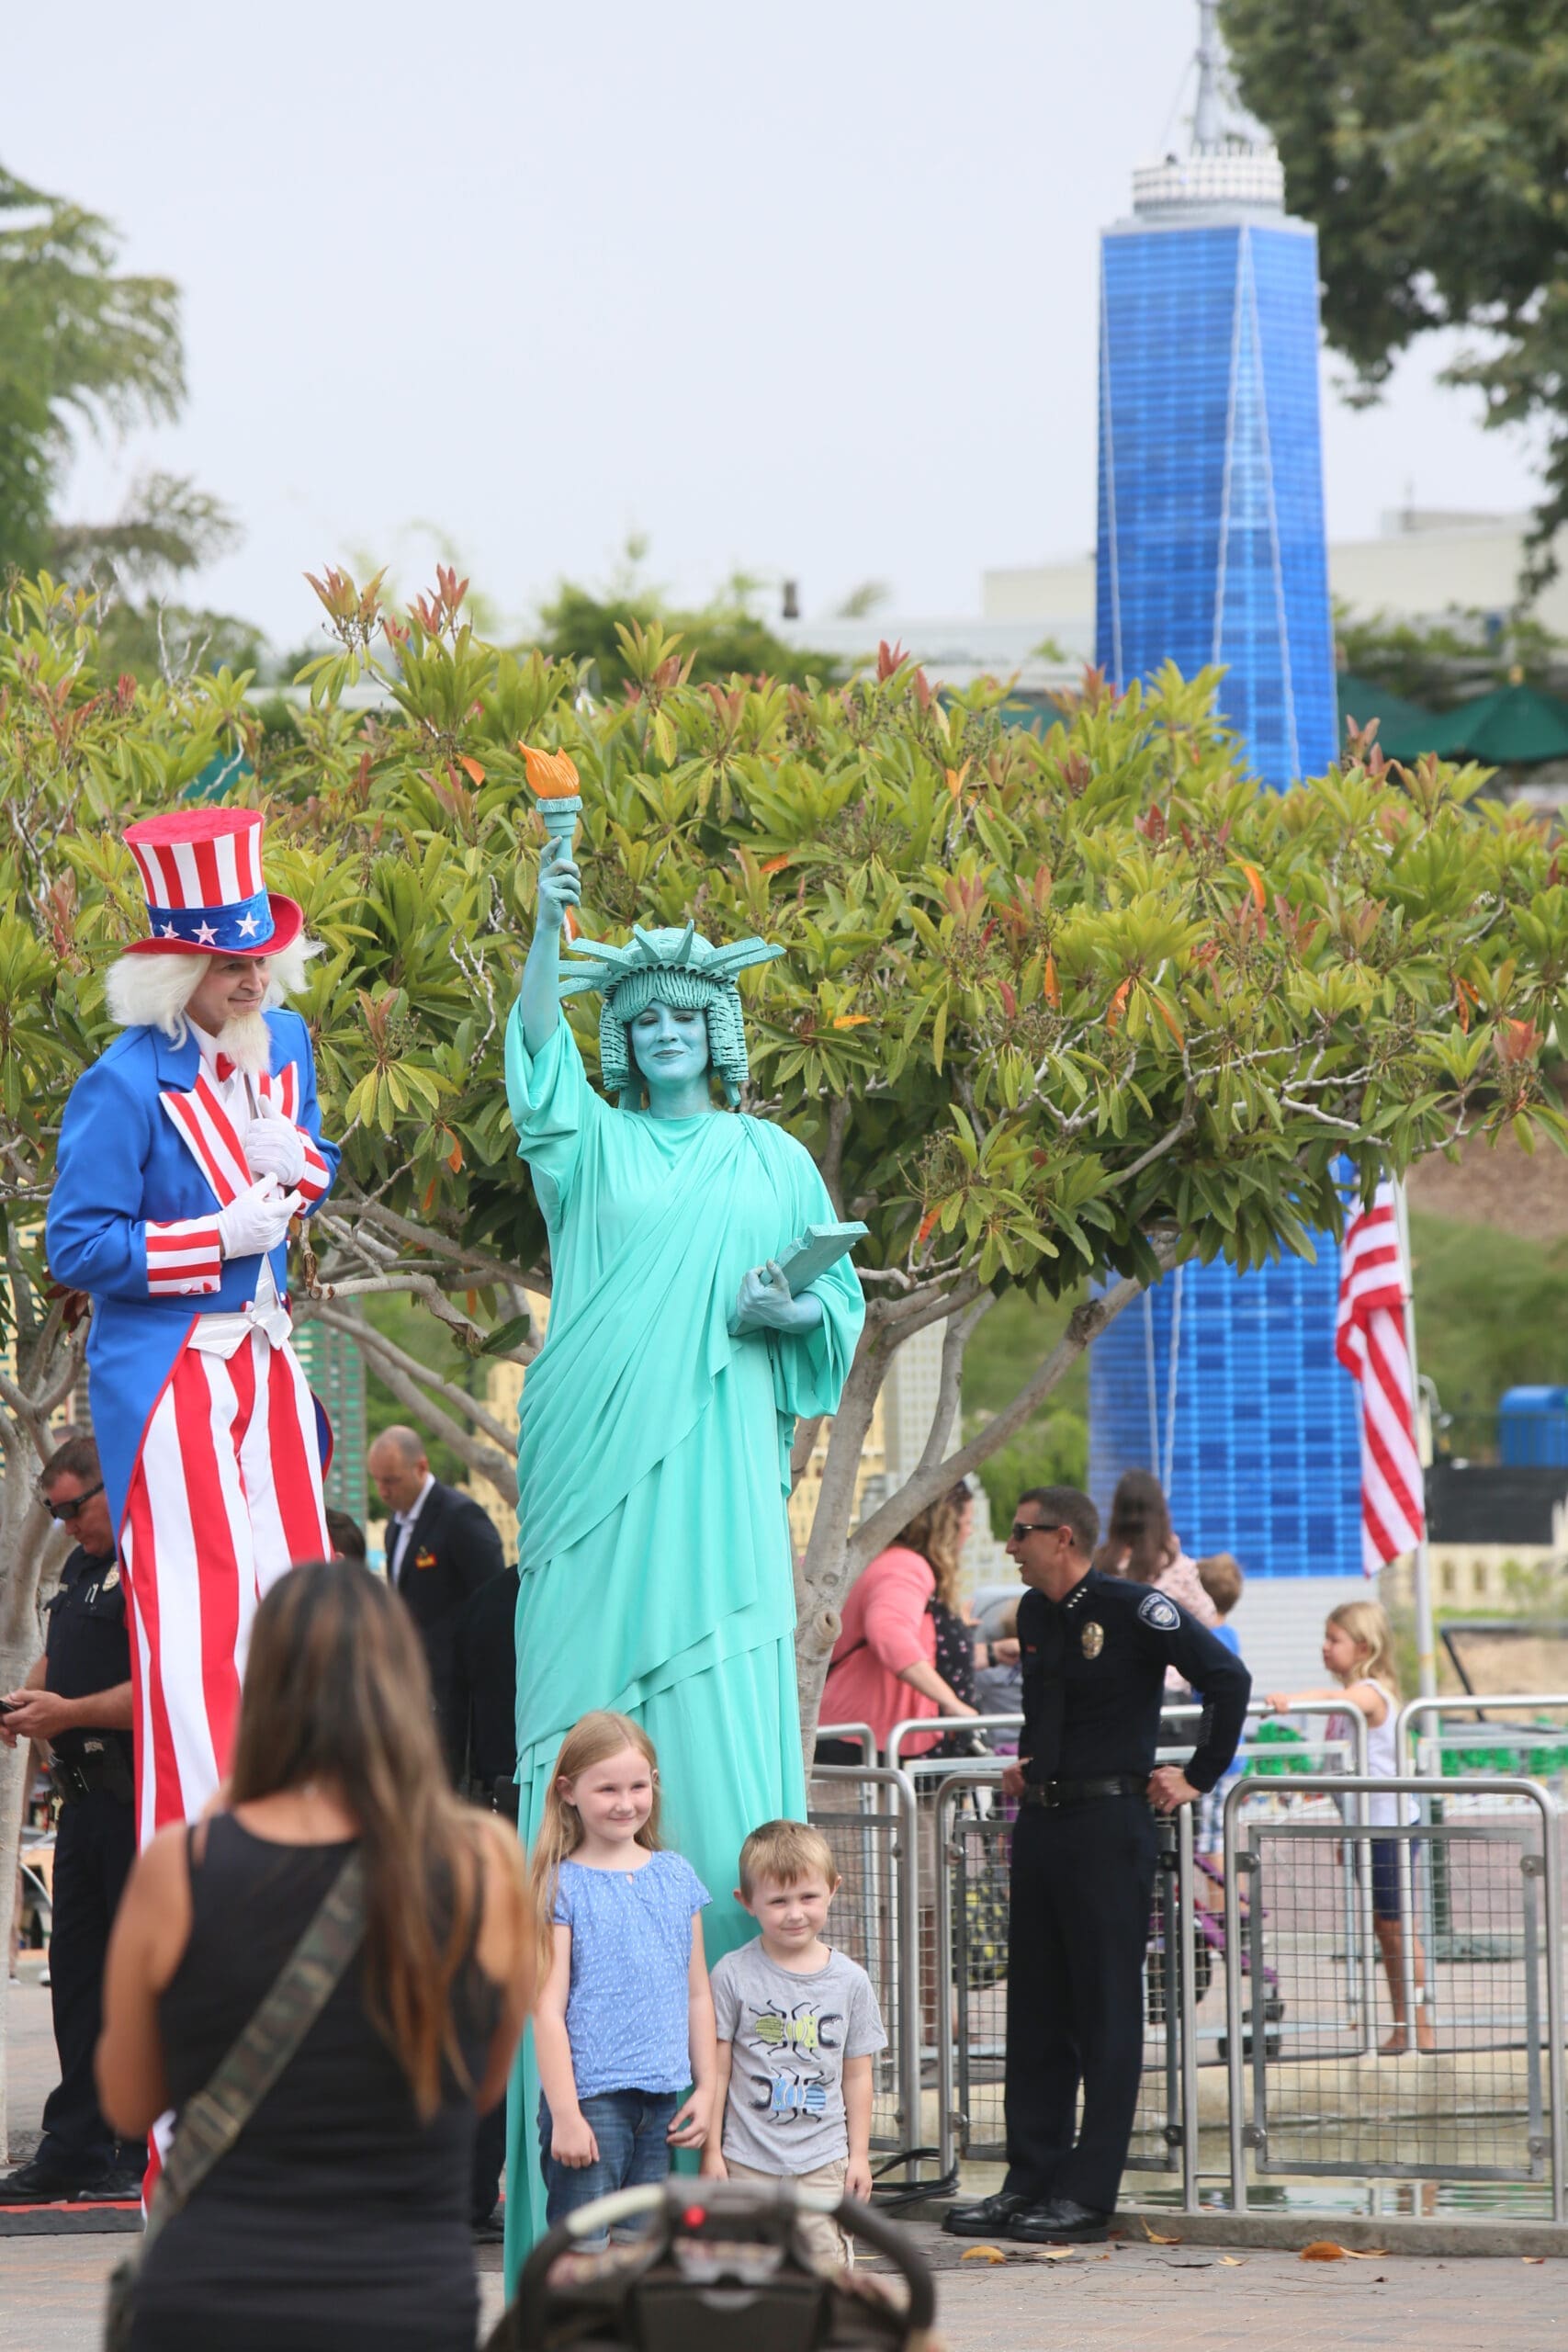 Legoland California's new One World Trade Center during the launching of the world's largest Lego Building in the Mini Land New York exhibit area on Thursday, June 30, 2016 in Carlsbad, California.(Photo by Sandy Huffaker/Legoland)